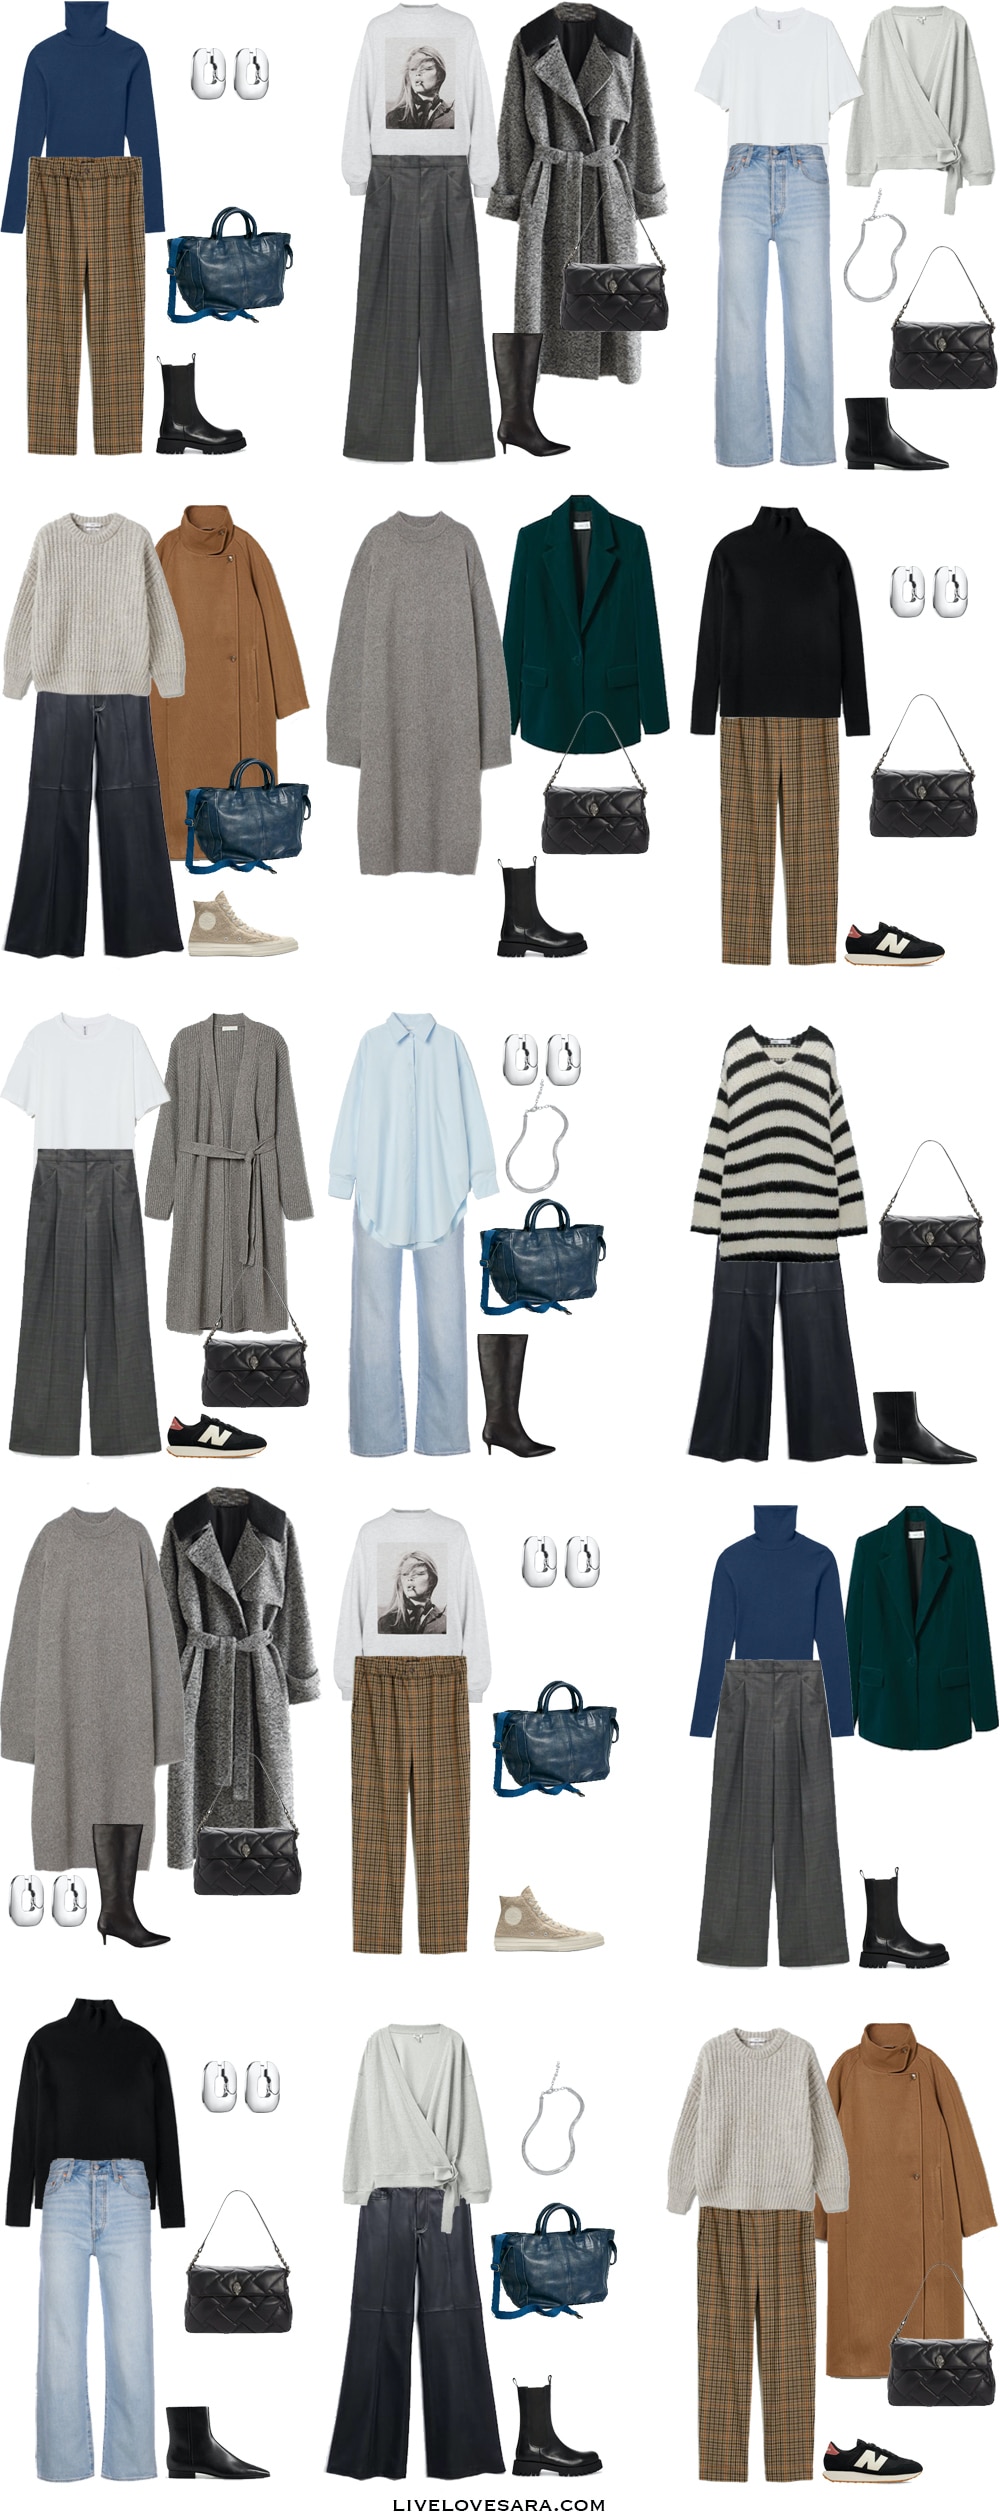 A white background with outfits 1-15 built from the winter capsule wardrobe.